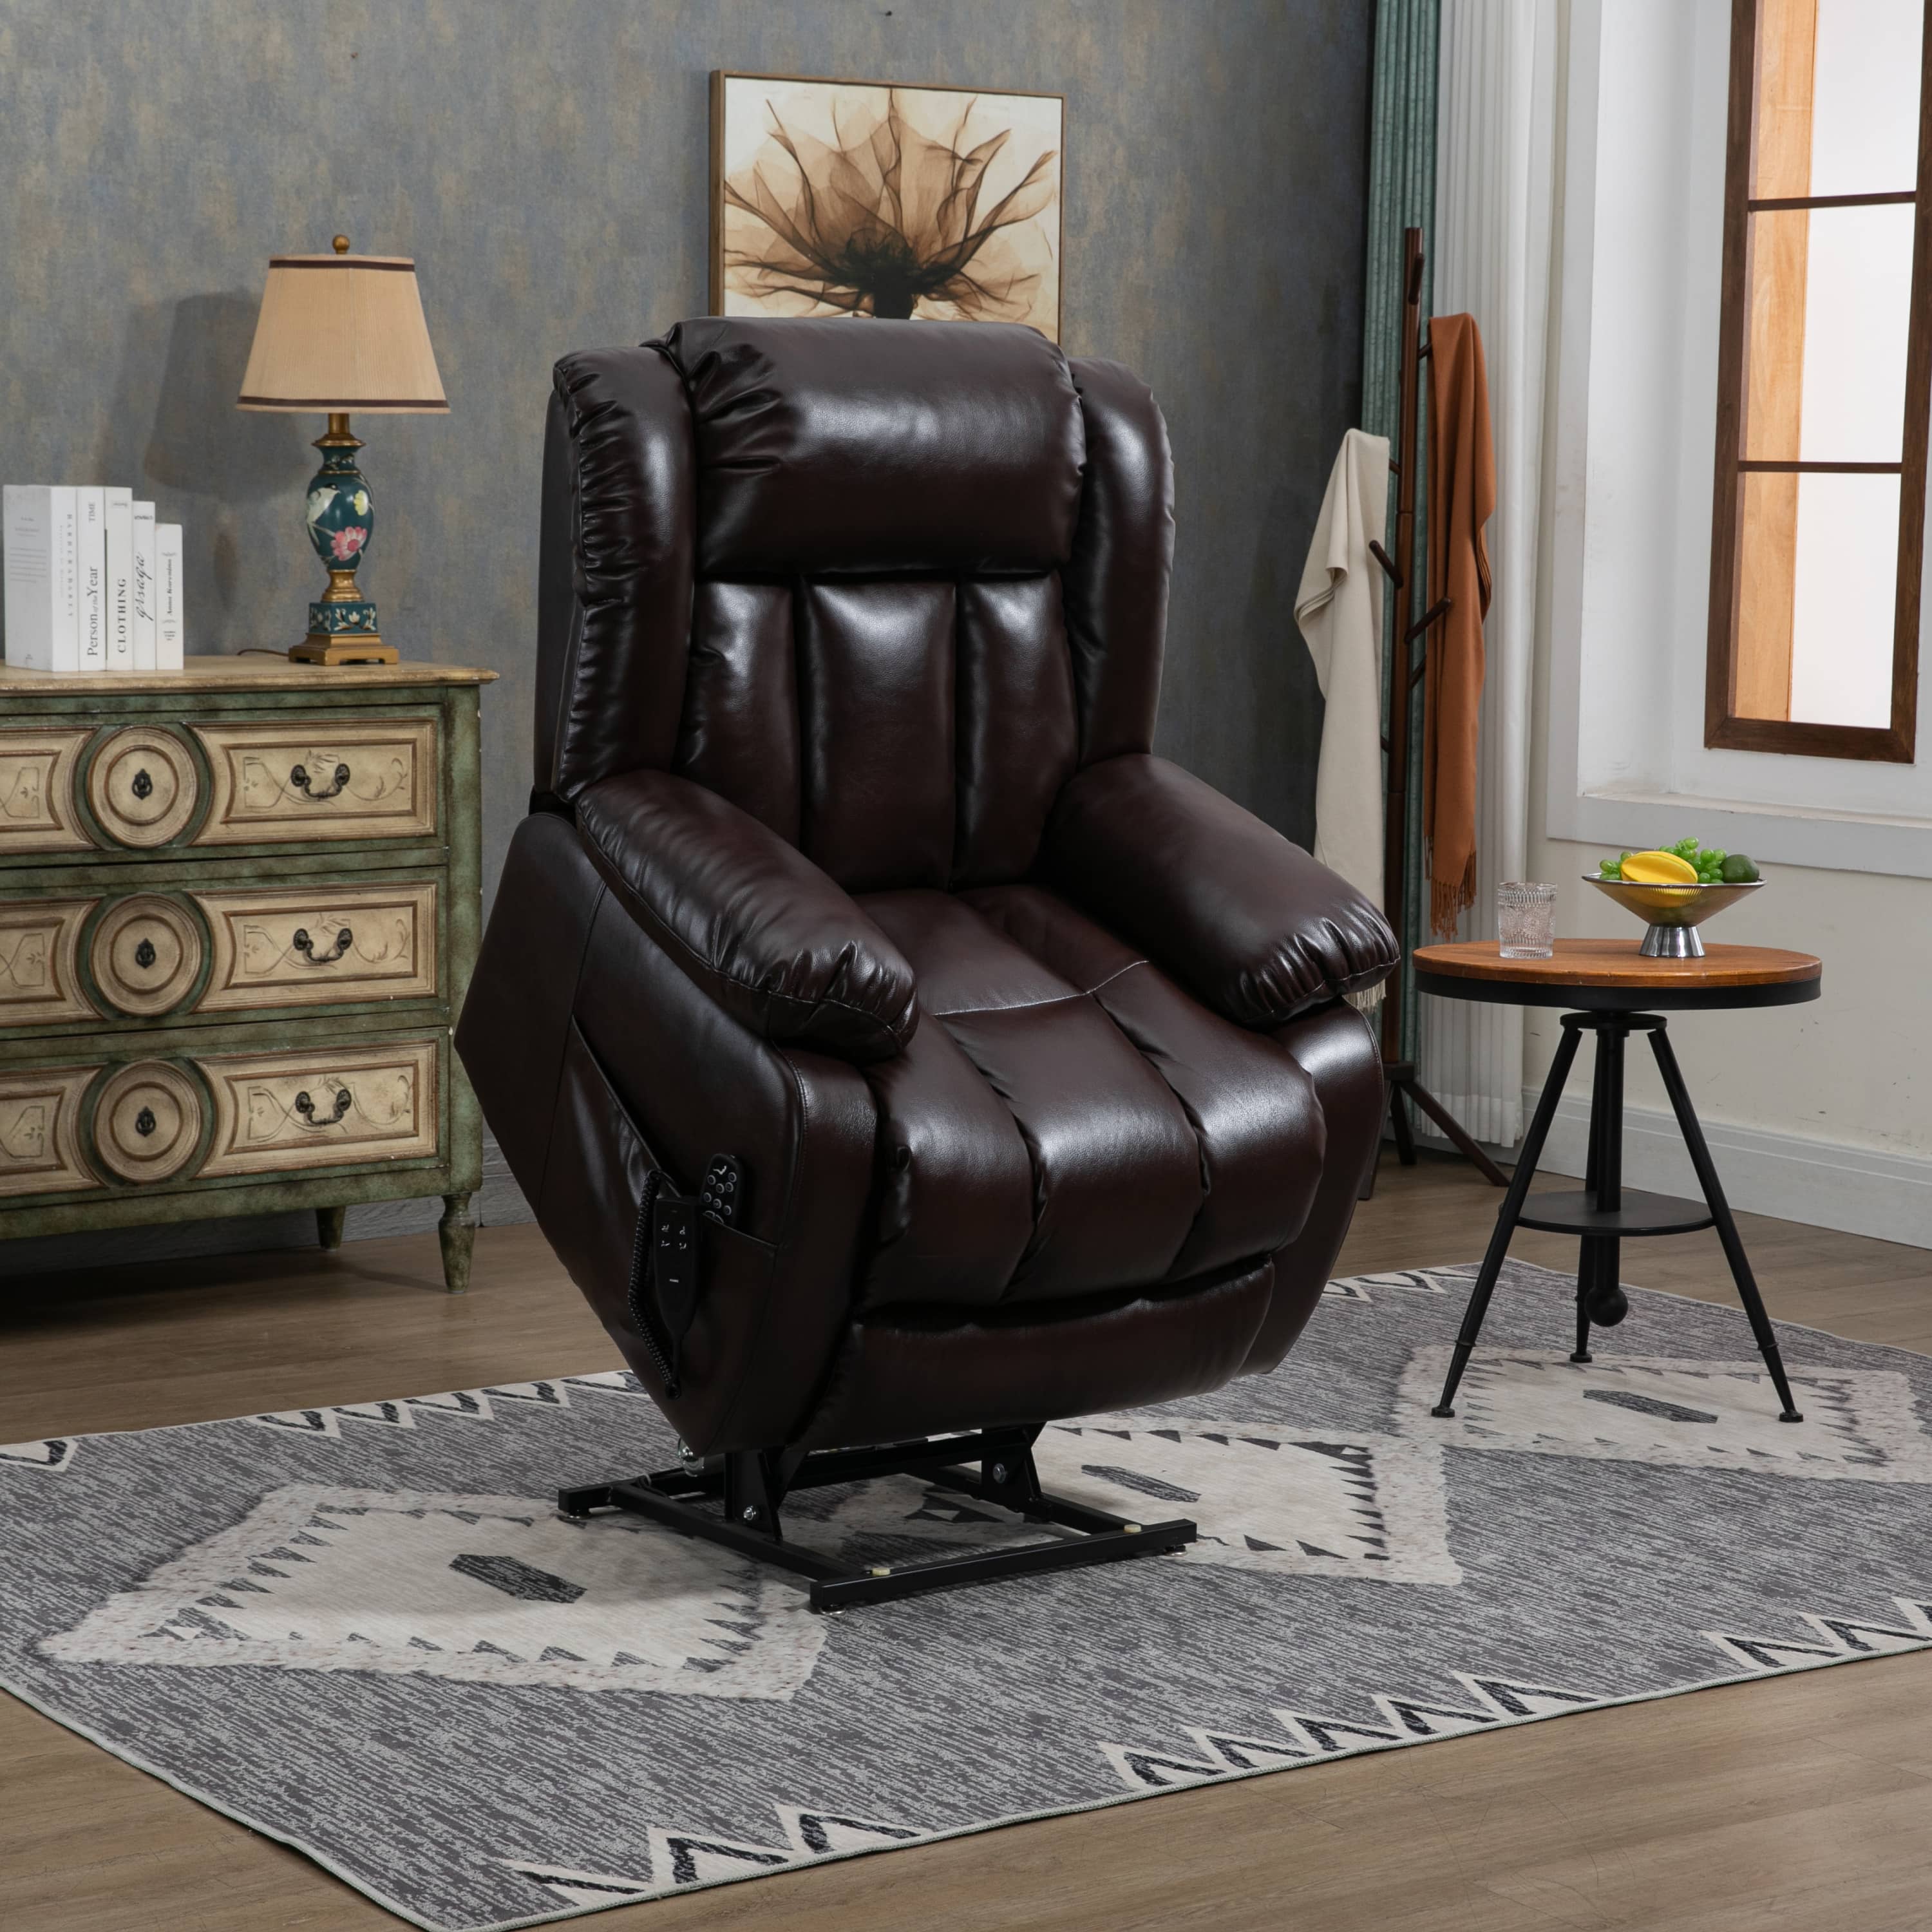 Medium Size Infinite Position Brown Power Lift Recliner Chair with Massage and Heat